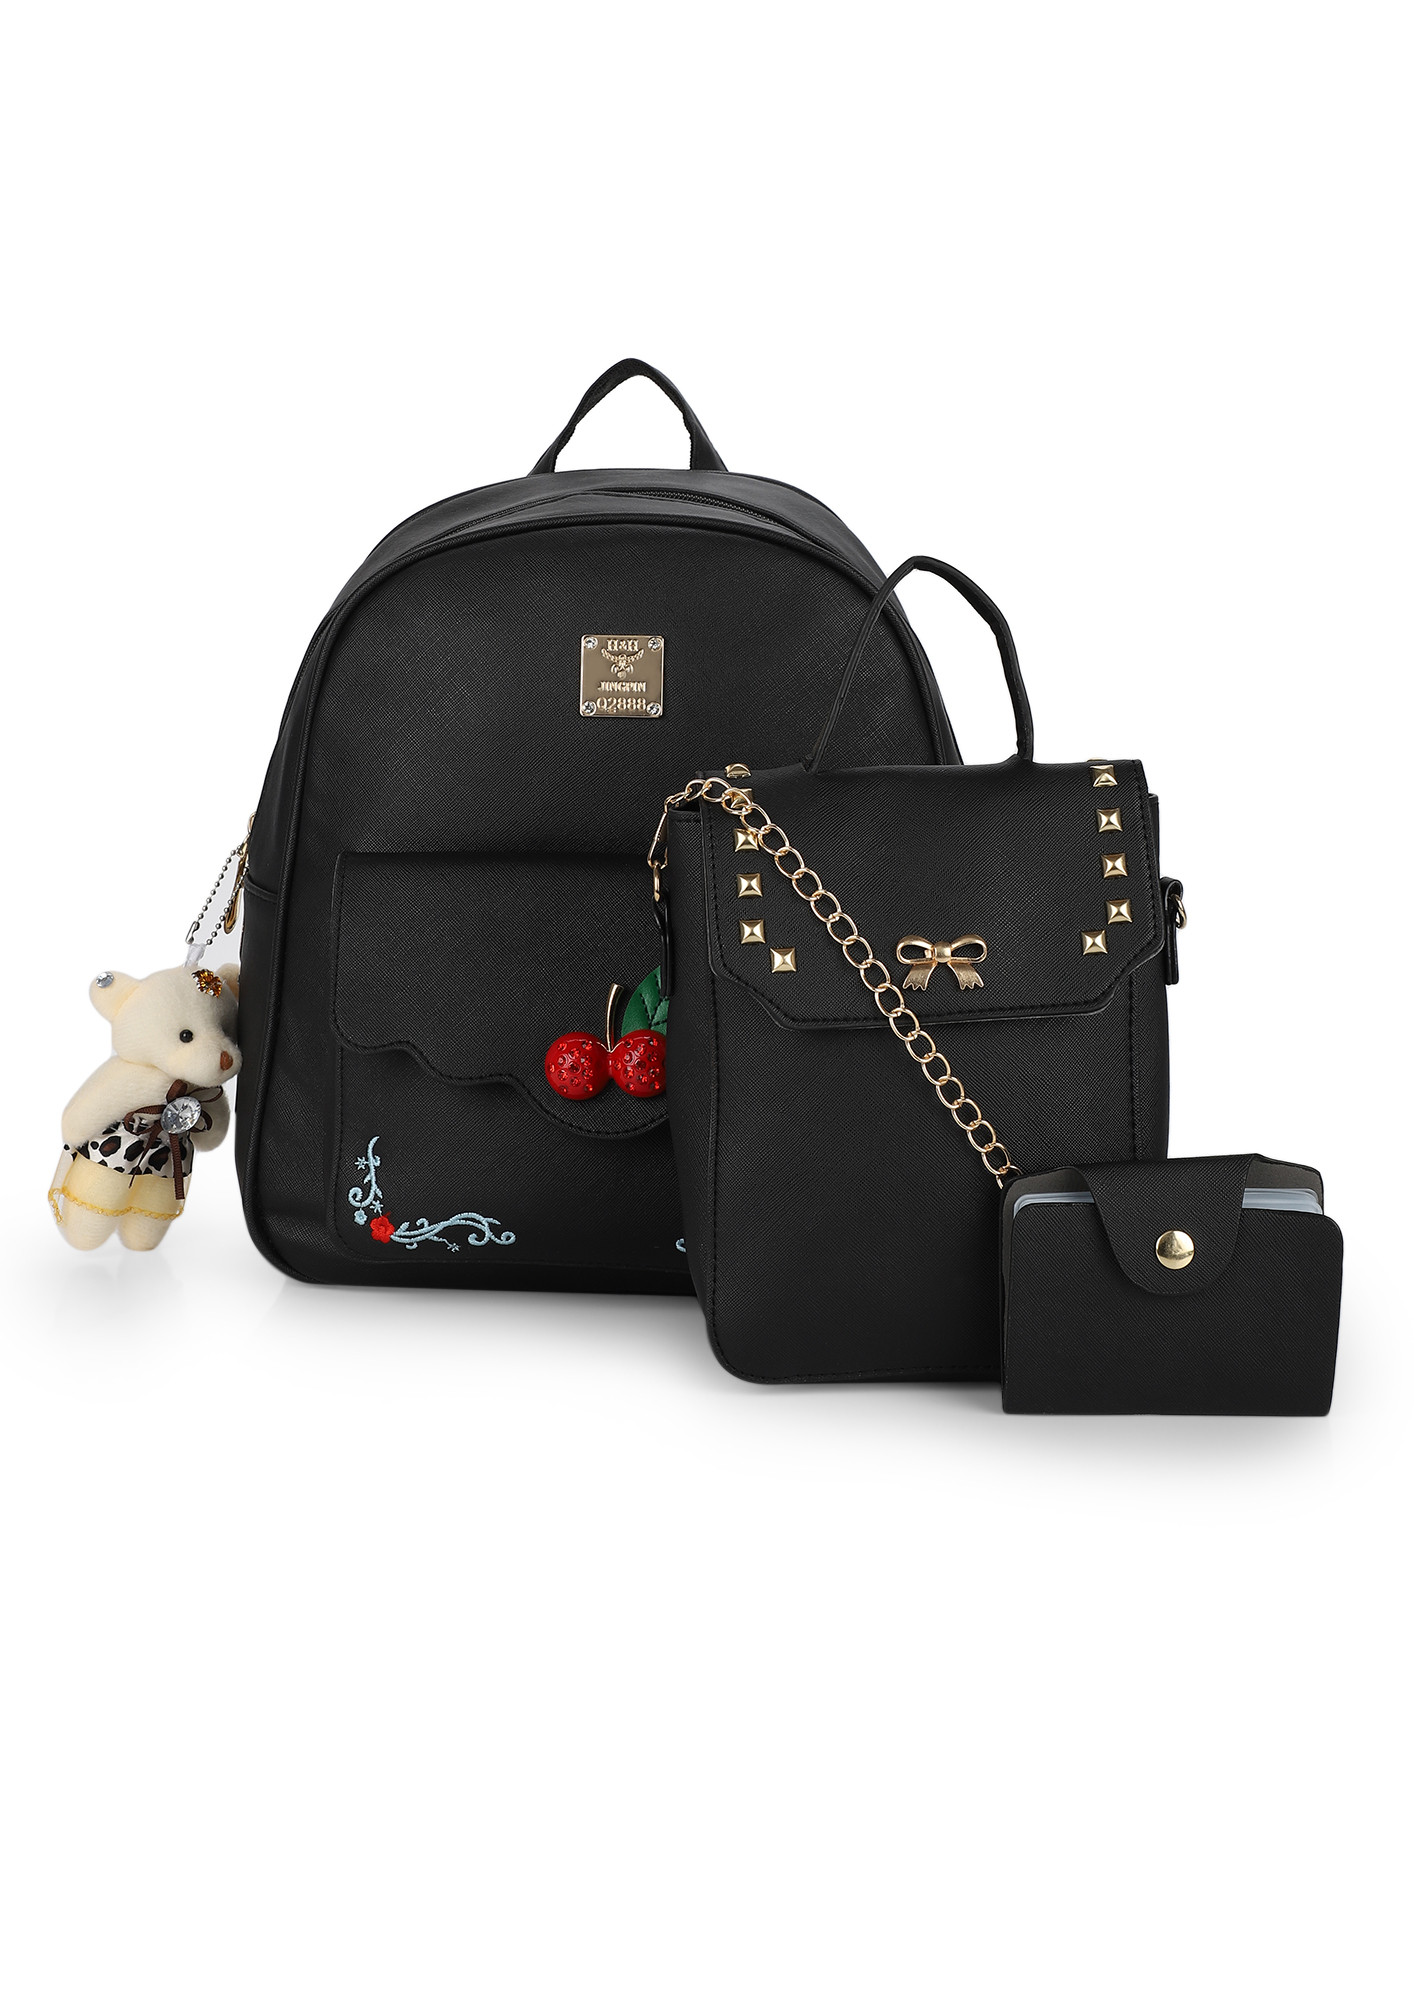 CHERRY ON TOP BLACK BACKPACK